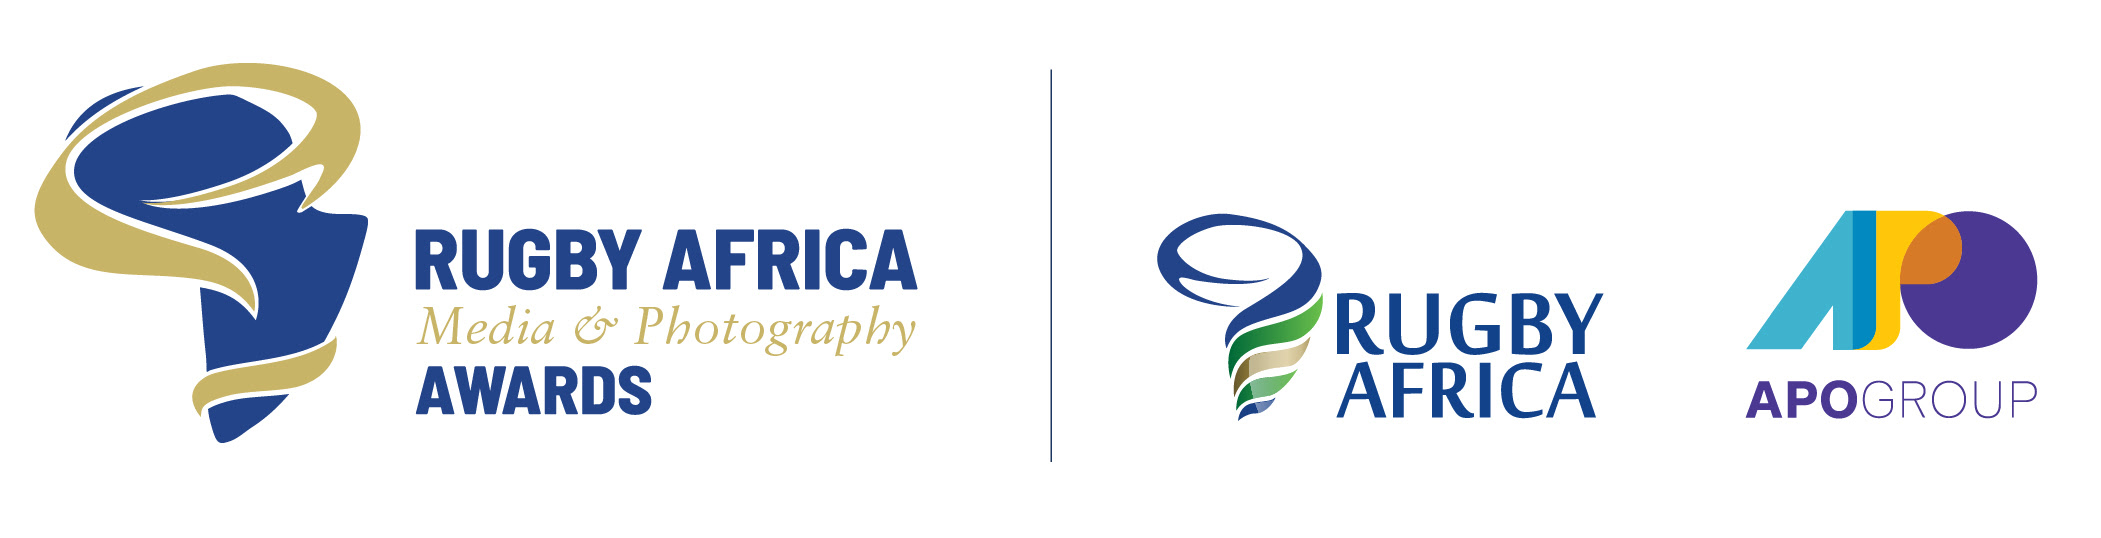 APO Group announces stunning jury for the inaugural Rugby Africa Media, Photography Awards